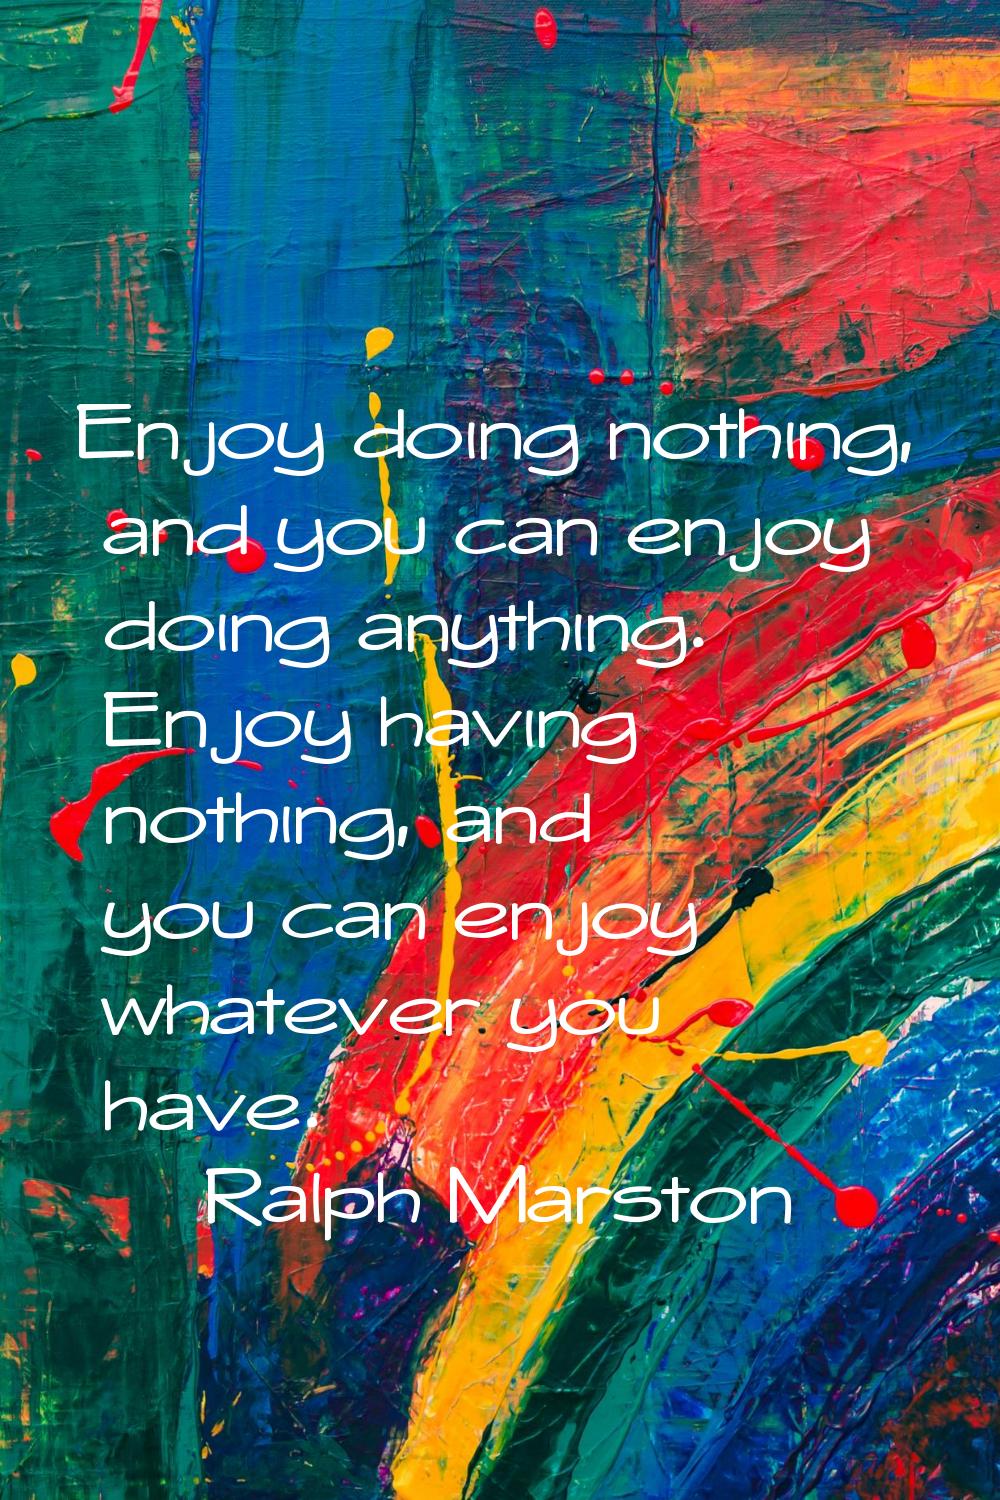 Enjoy doing nothing, and you can enjoy doing anything. Enjoy having nothing, and you can enjoy what